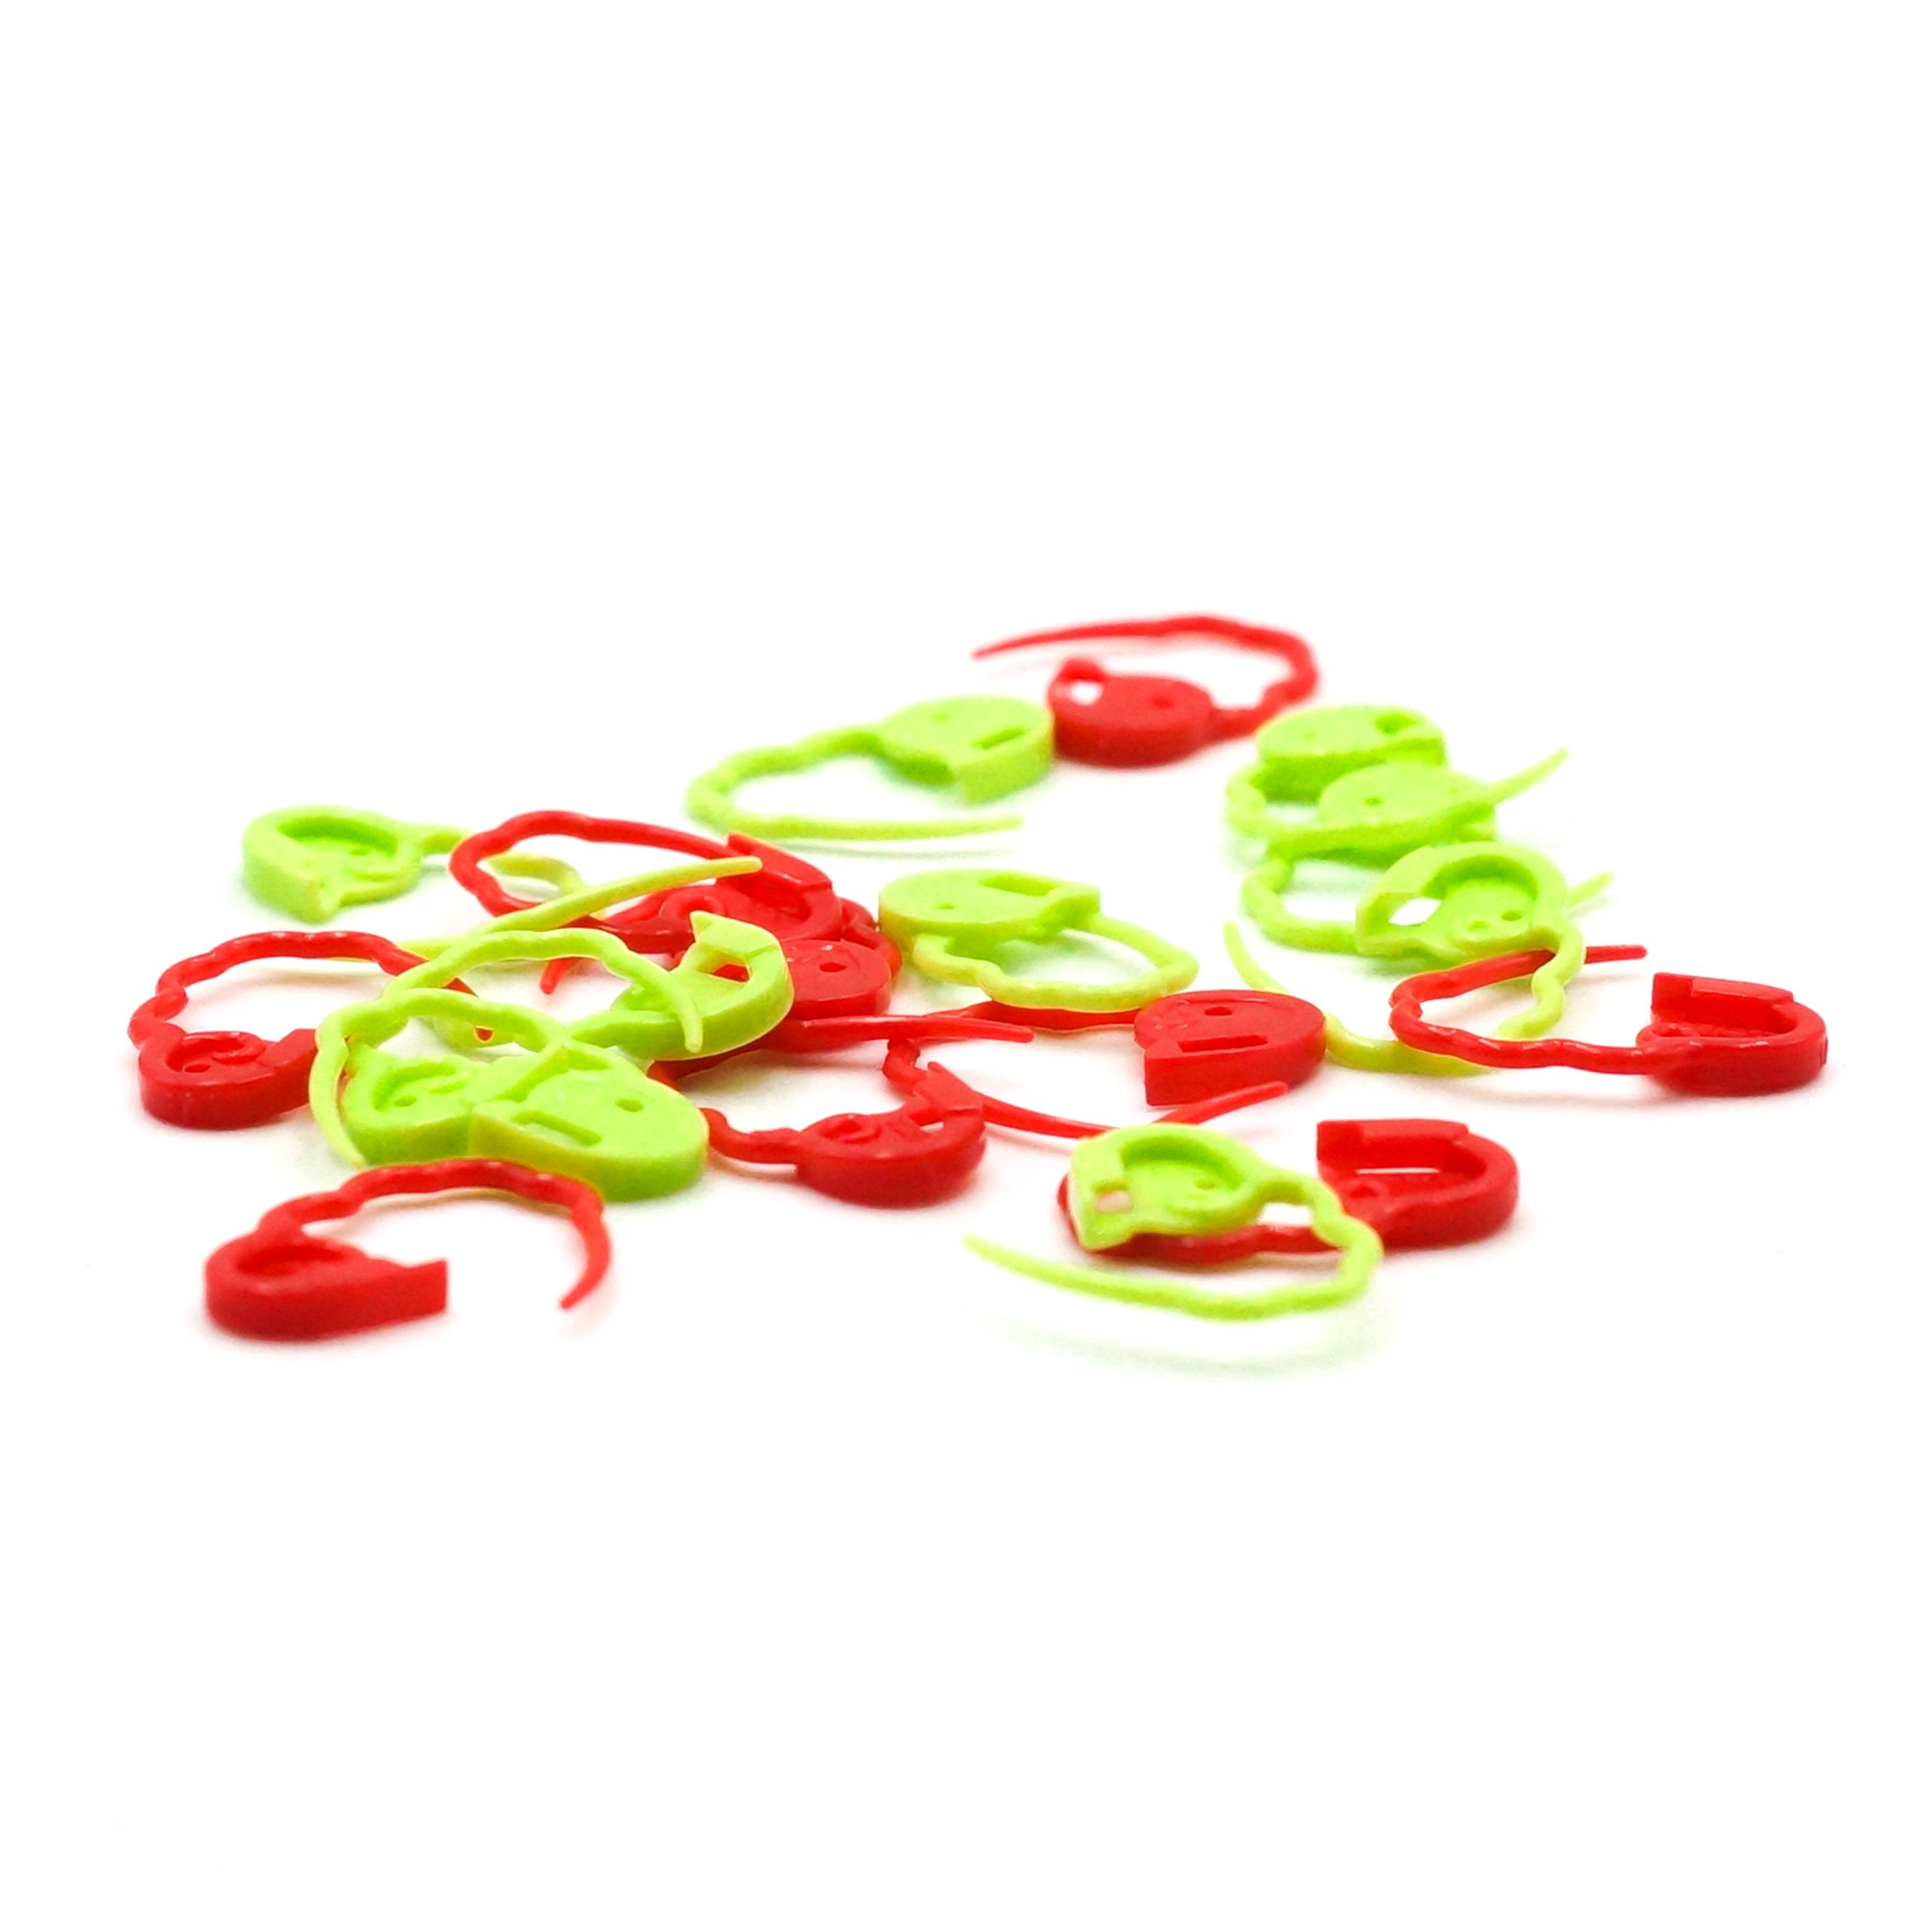 Clover Quick Locking Stitch Markers - Large